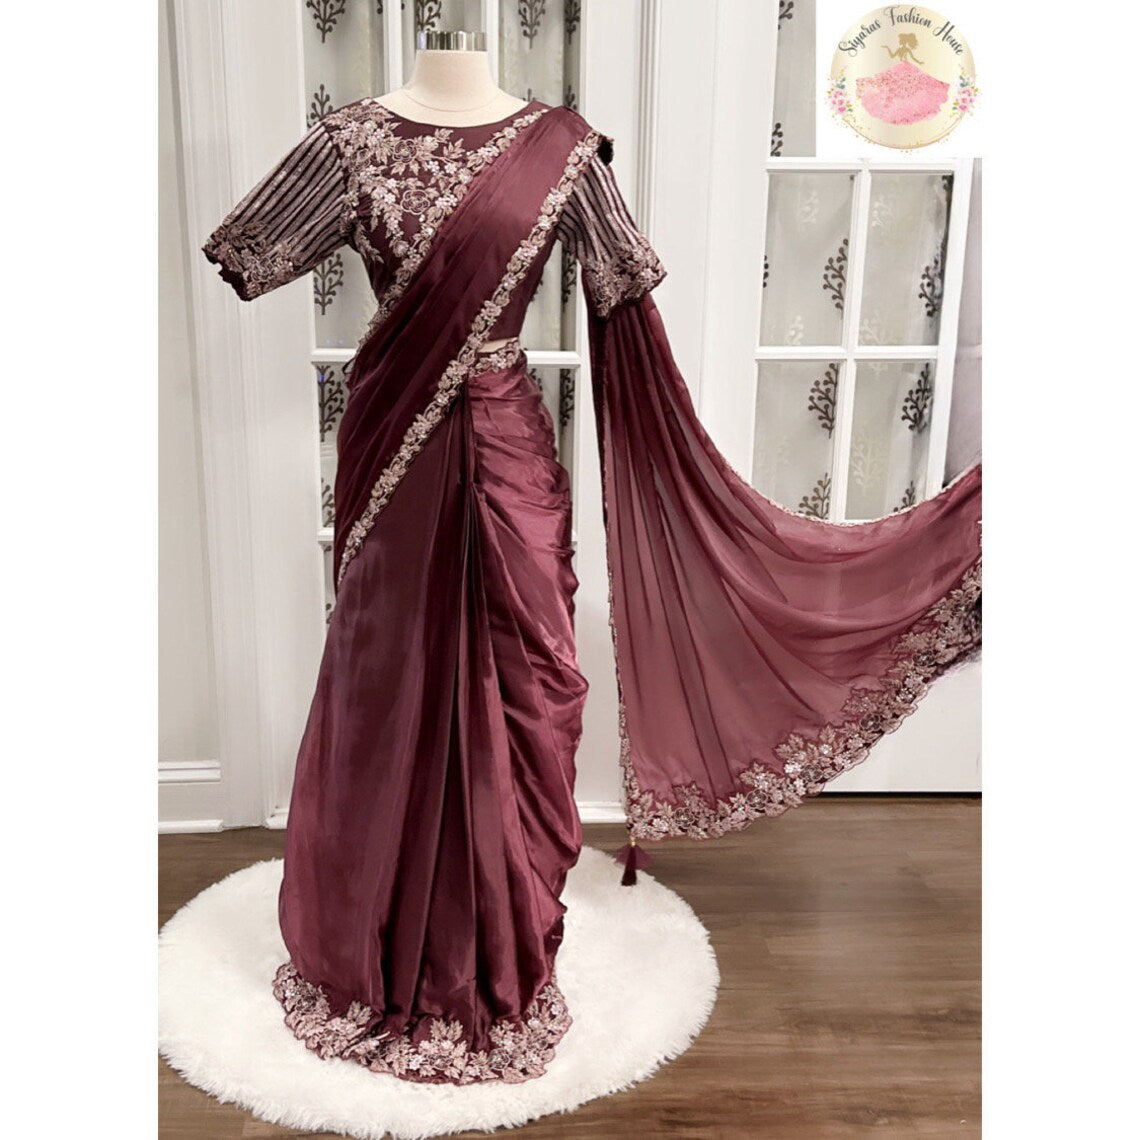 Plum Purple Silk Crepe Saree with Enchanting Embroidery Trendy Ready to wear Pre pleated saree